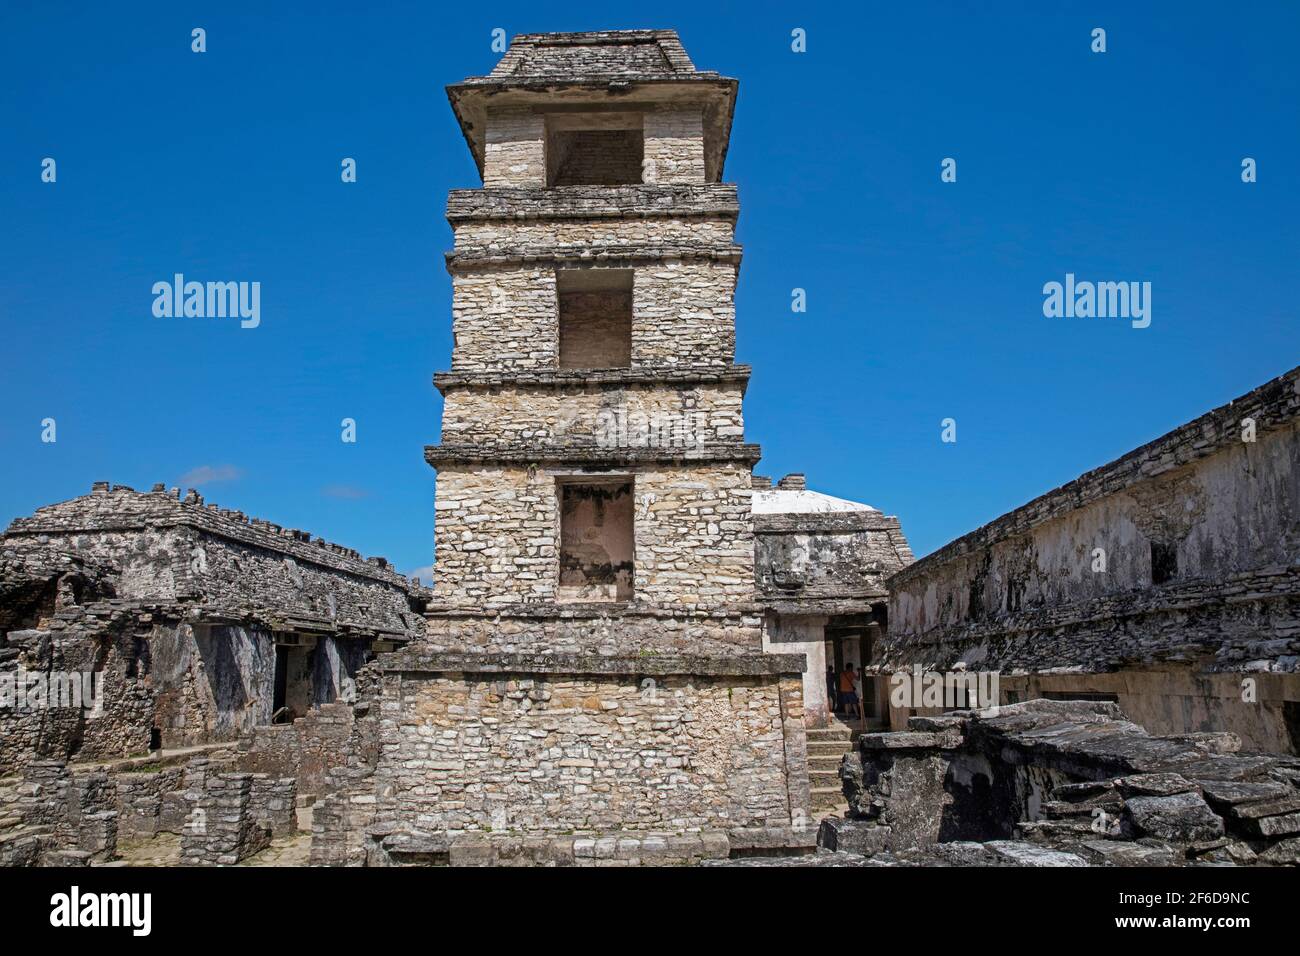 Palace with Observation Tower at the pre-Columbian Maya civilization site of Palenque, Chiapas, southern Mexico Stock Photo